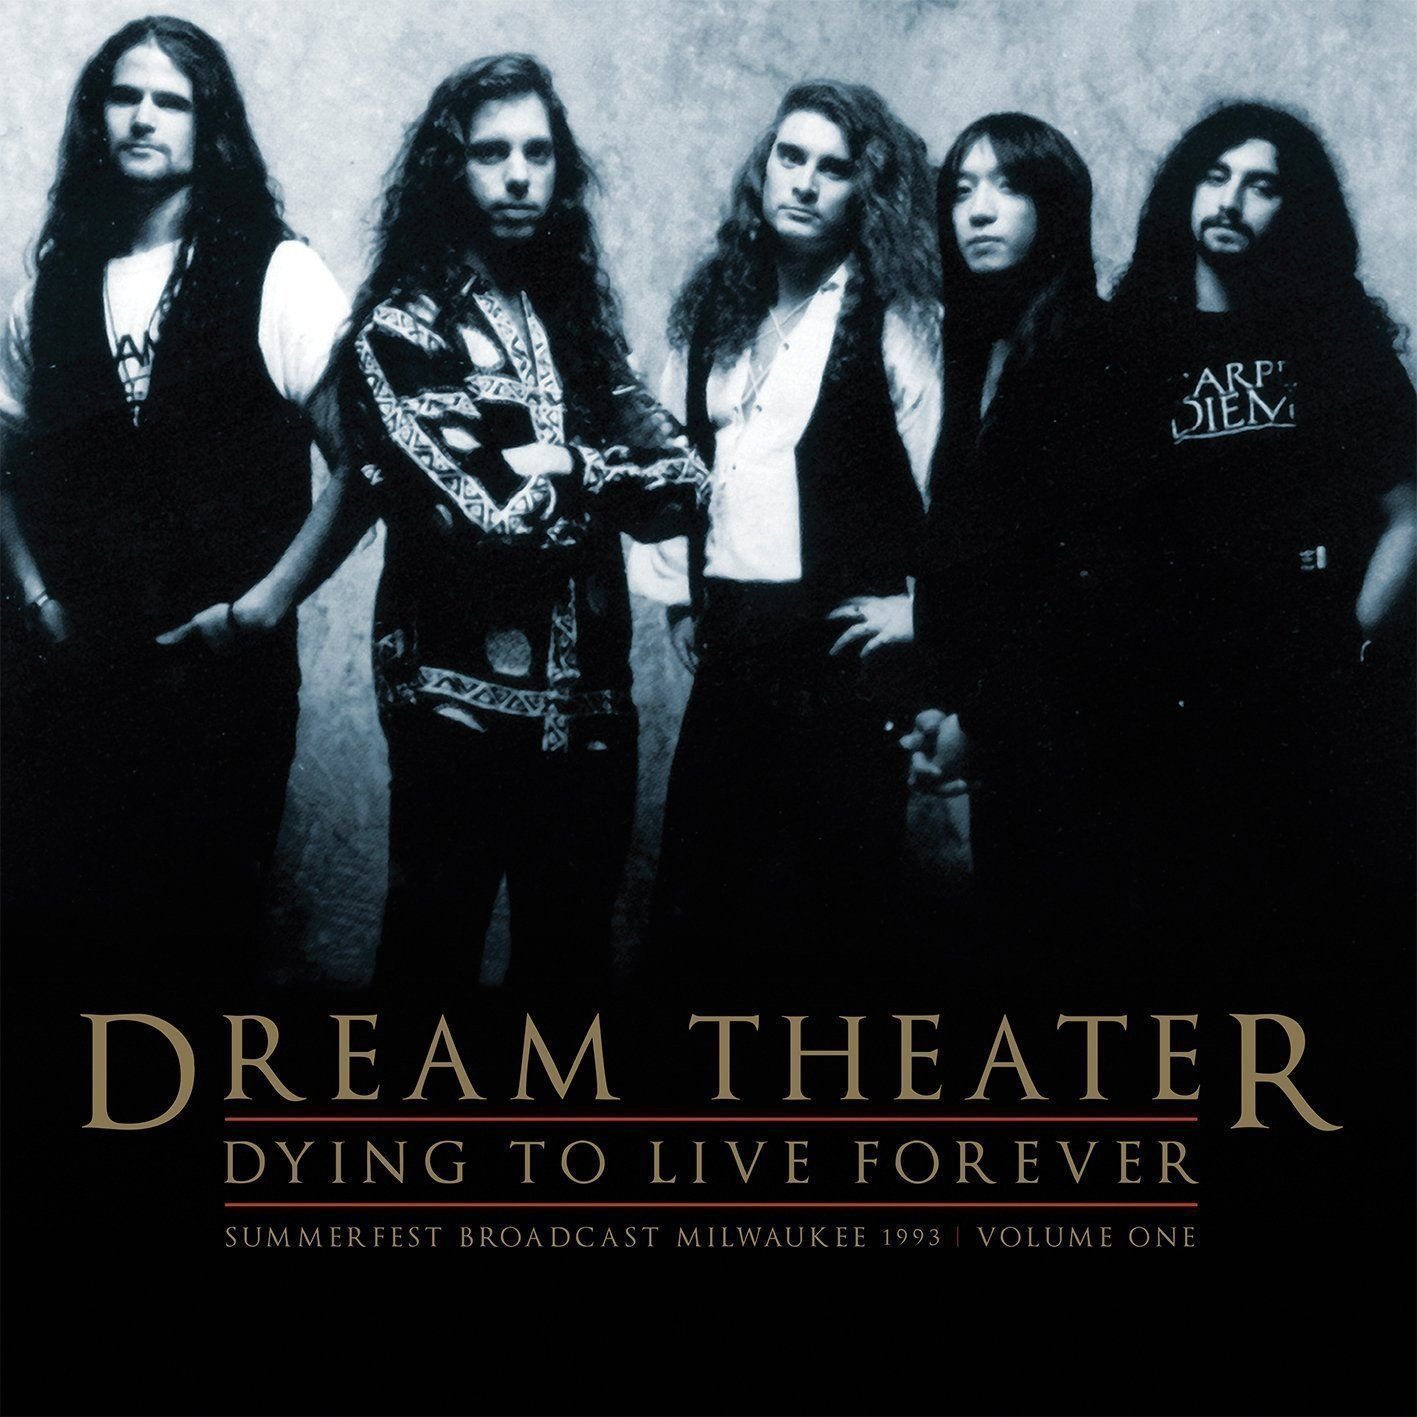 LP Dream Theater - Dying To Live Forever - Milwaukee 1993 Vol. 1 (2 LP)